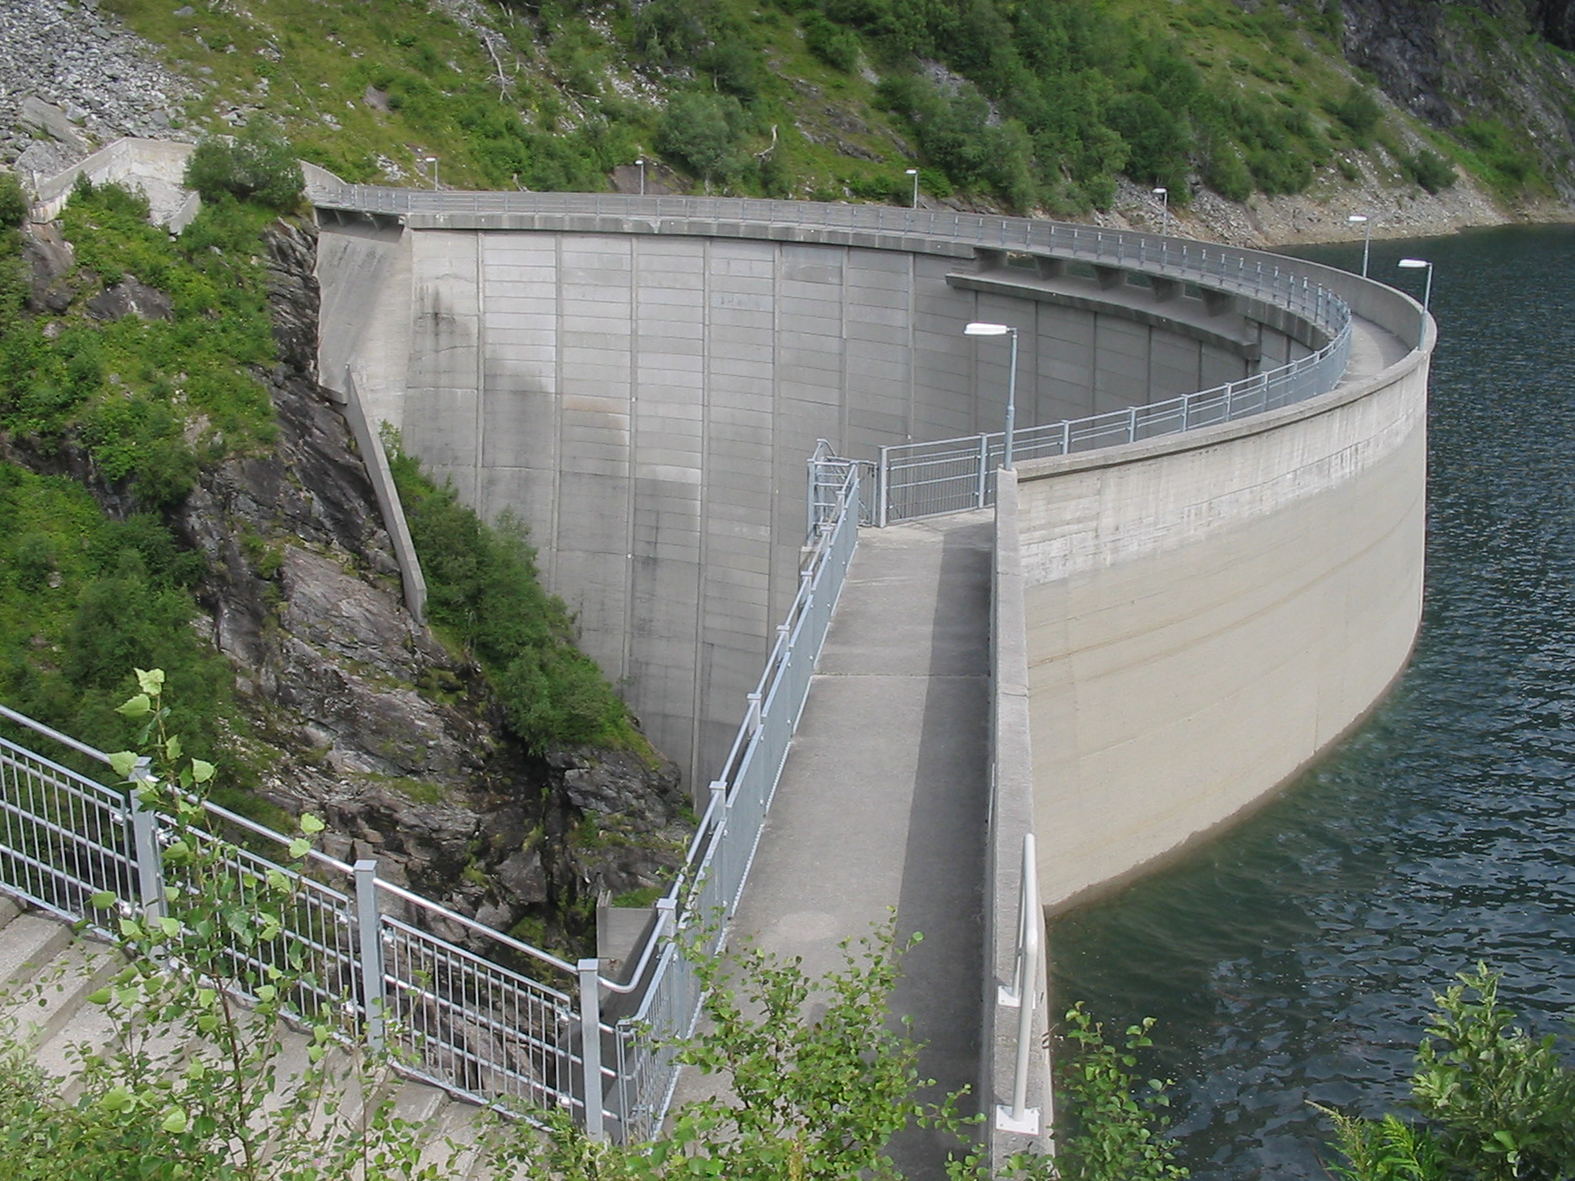 Figure 1: The Zakarias dam (completed 1969). Photography by Vidar Iversen.